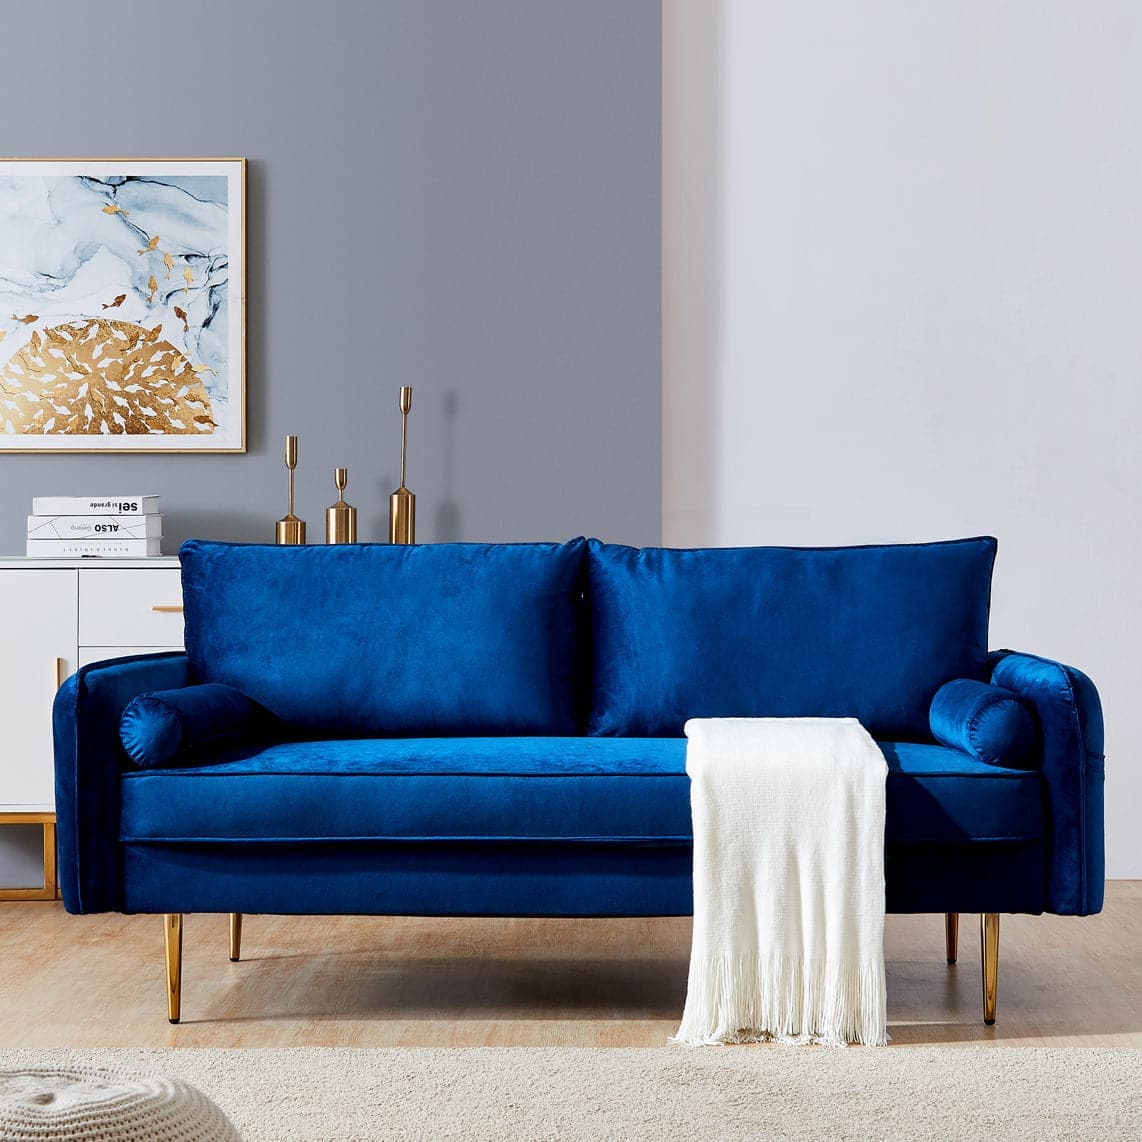 TFC&H Co. Velvet Fabric Sofa w/ Pocket - 71‘’Blue- Ships from The US - sofa at TFC&H Co.